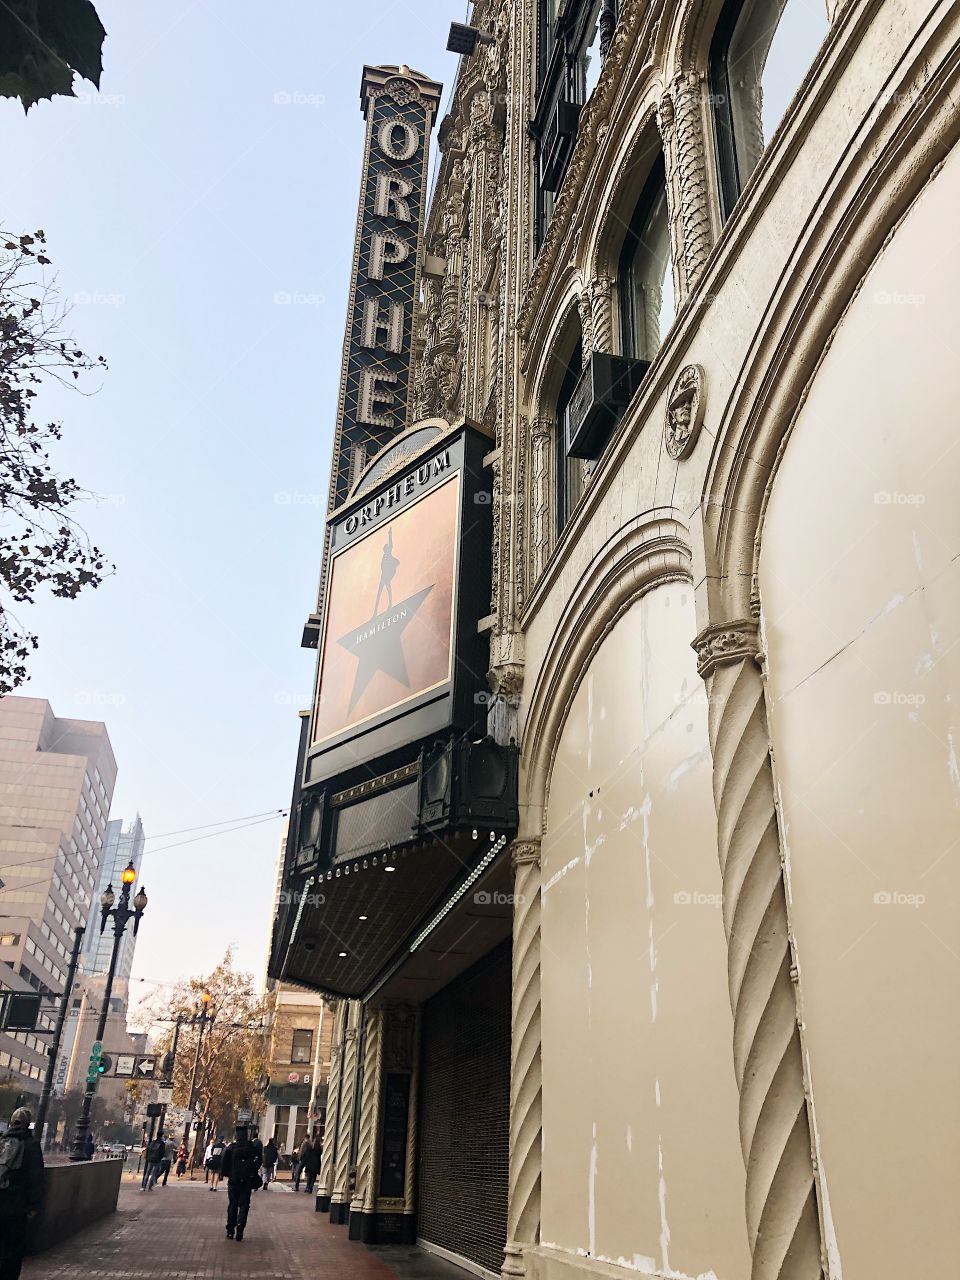 Hamilton theater in San Francisco, shot in the morning. The color scheme is soft, displaying the gold on the blue sky.